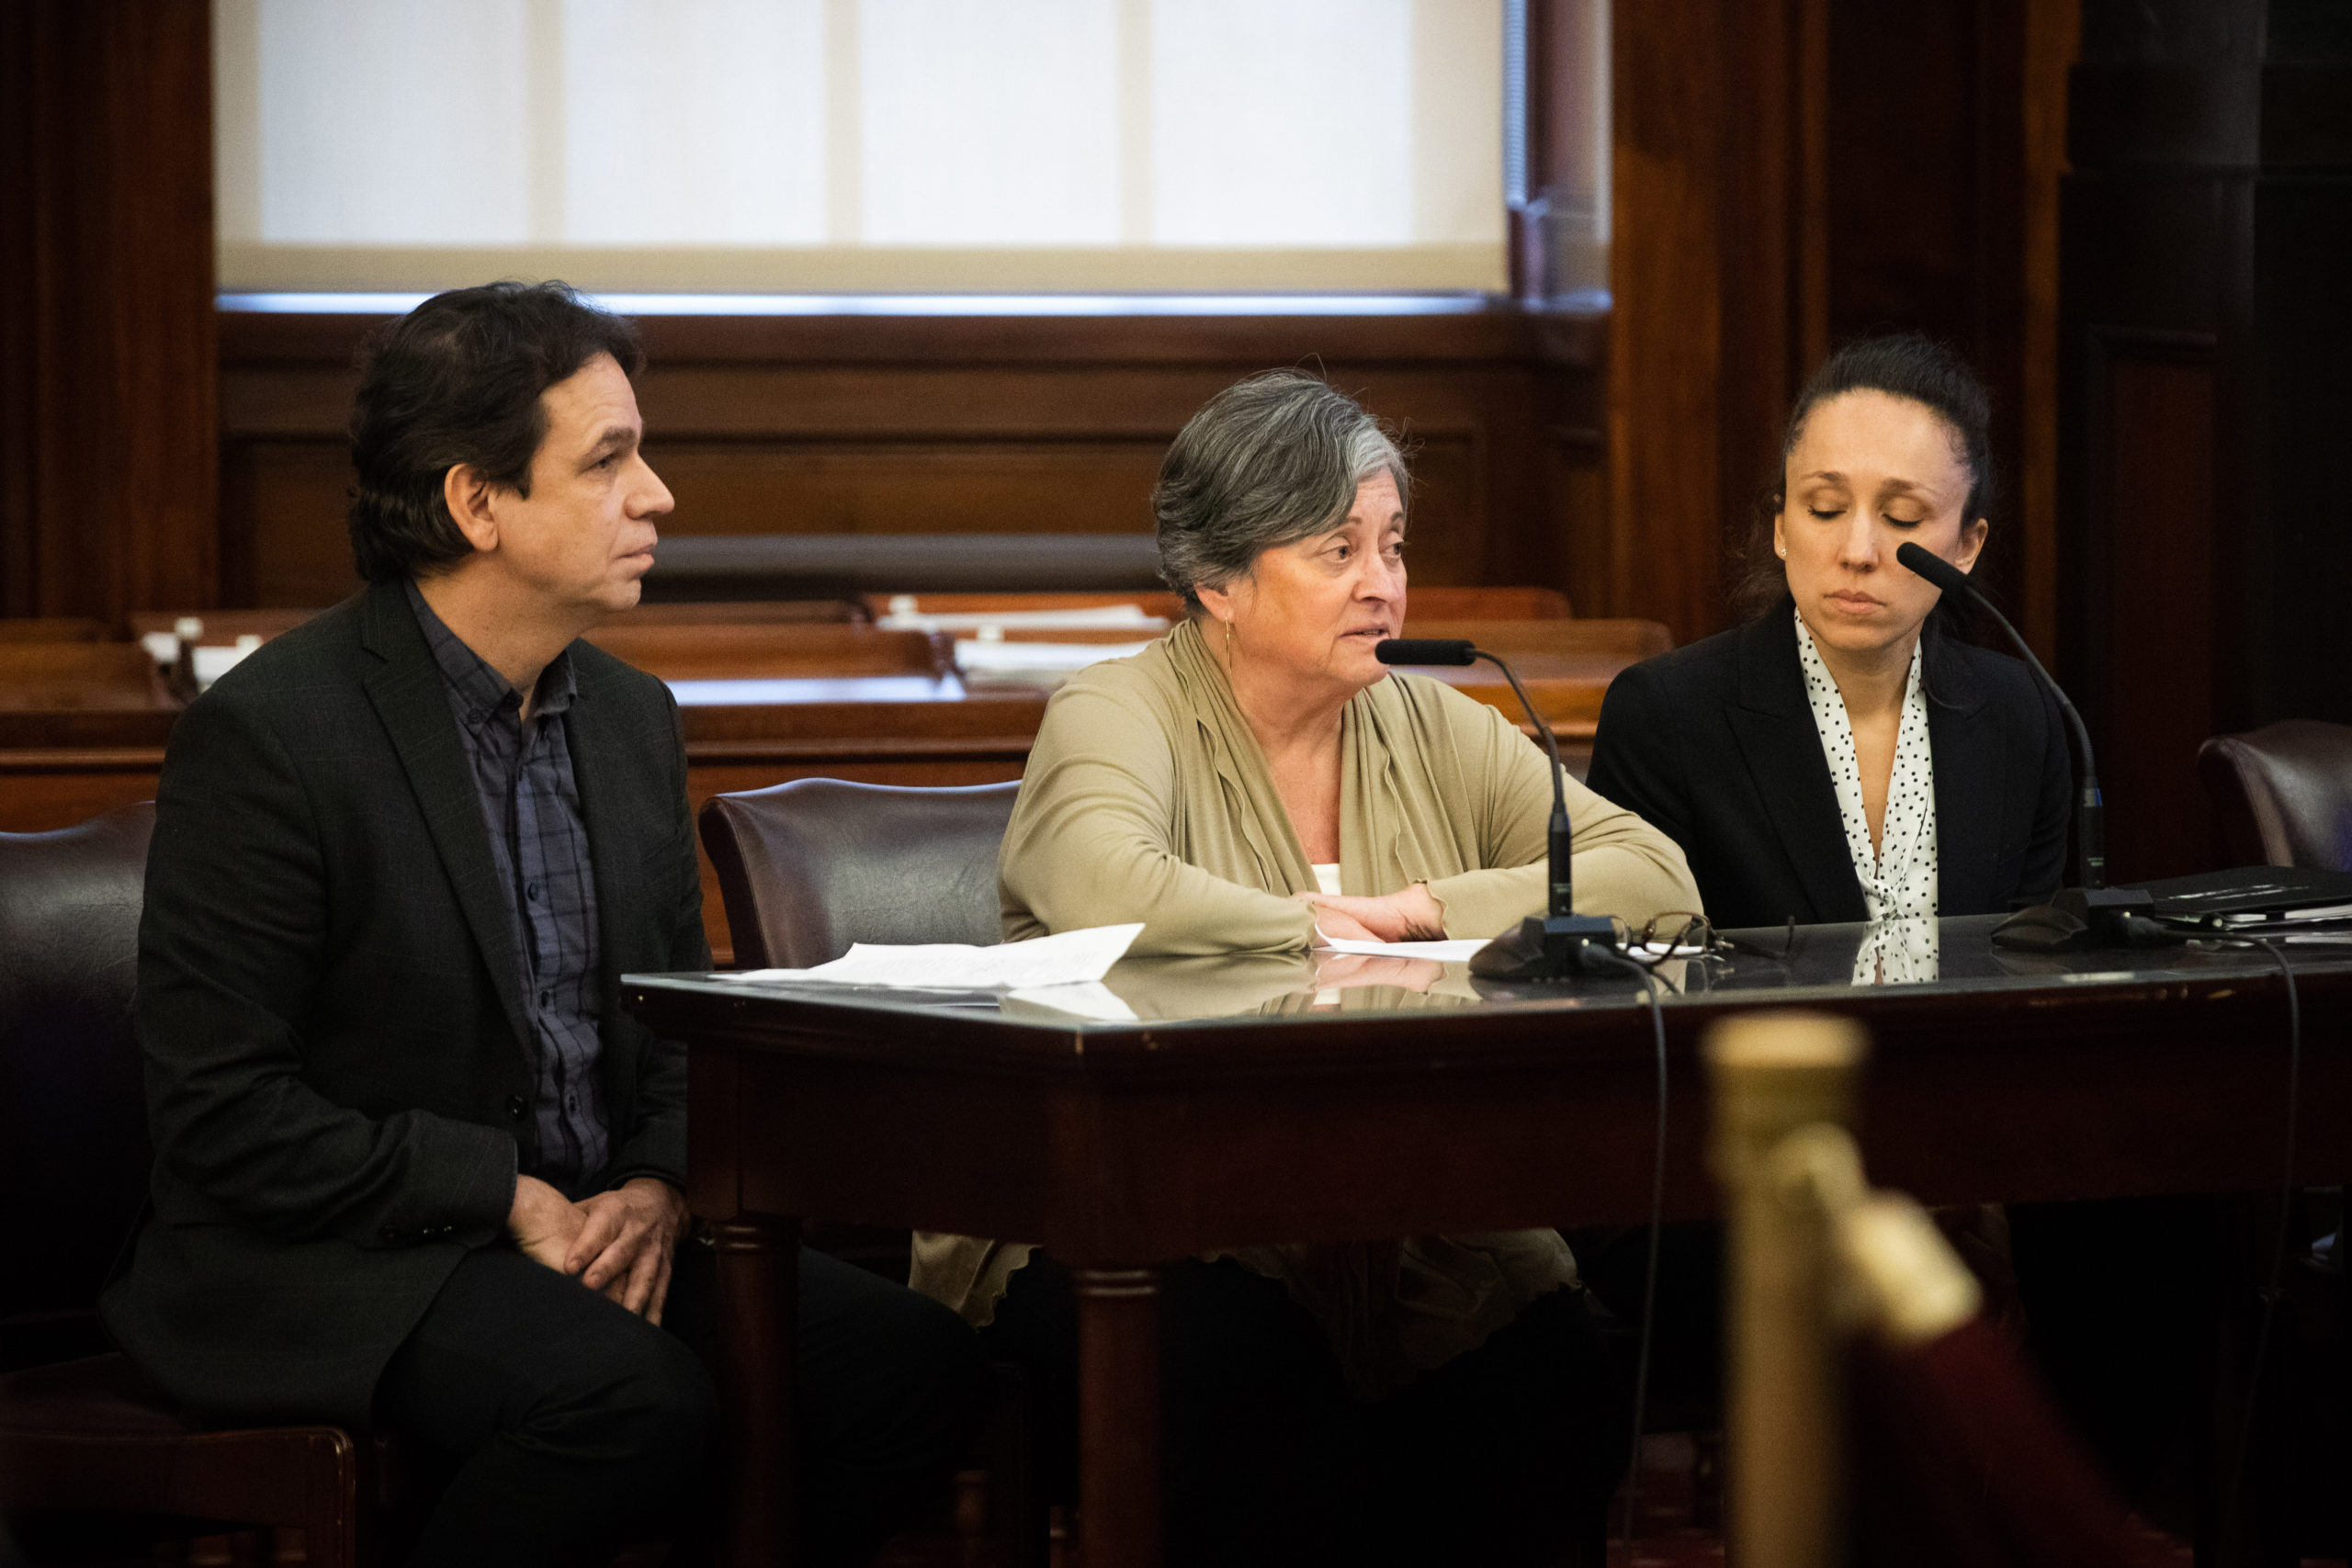 From left: Marc Wouters, Martha Bakos Dietz of the Brooklyn Heights Association, Hilary Jager of a Better Way. Photo: Paul Frangipane, Brooklyn Eagle